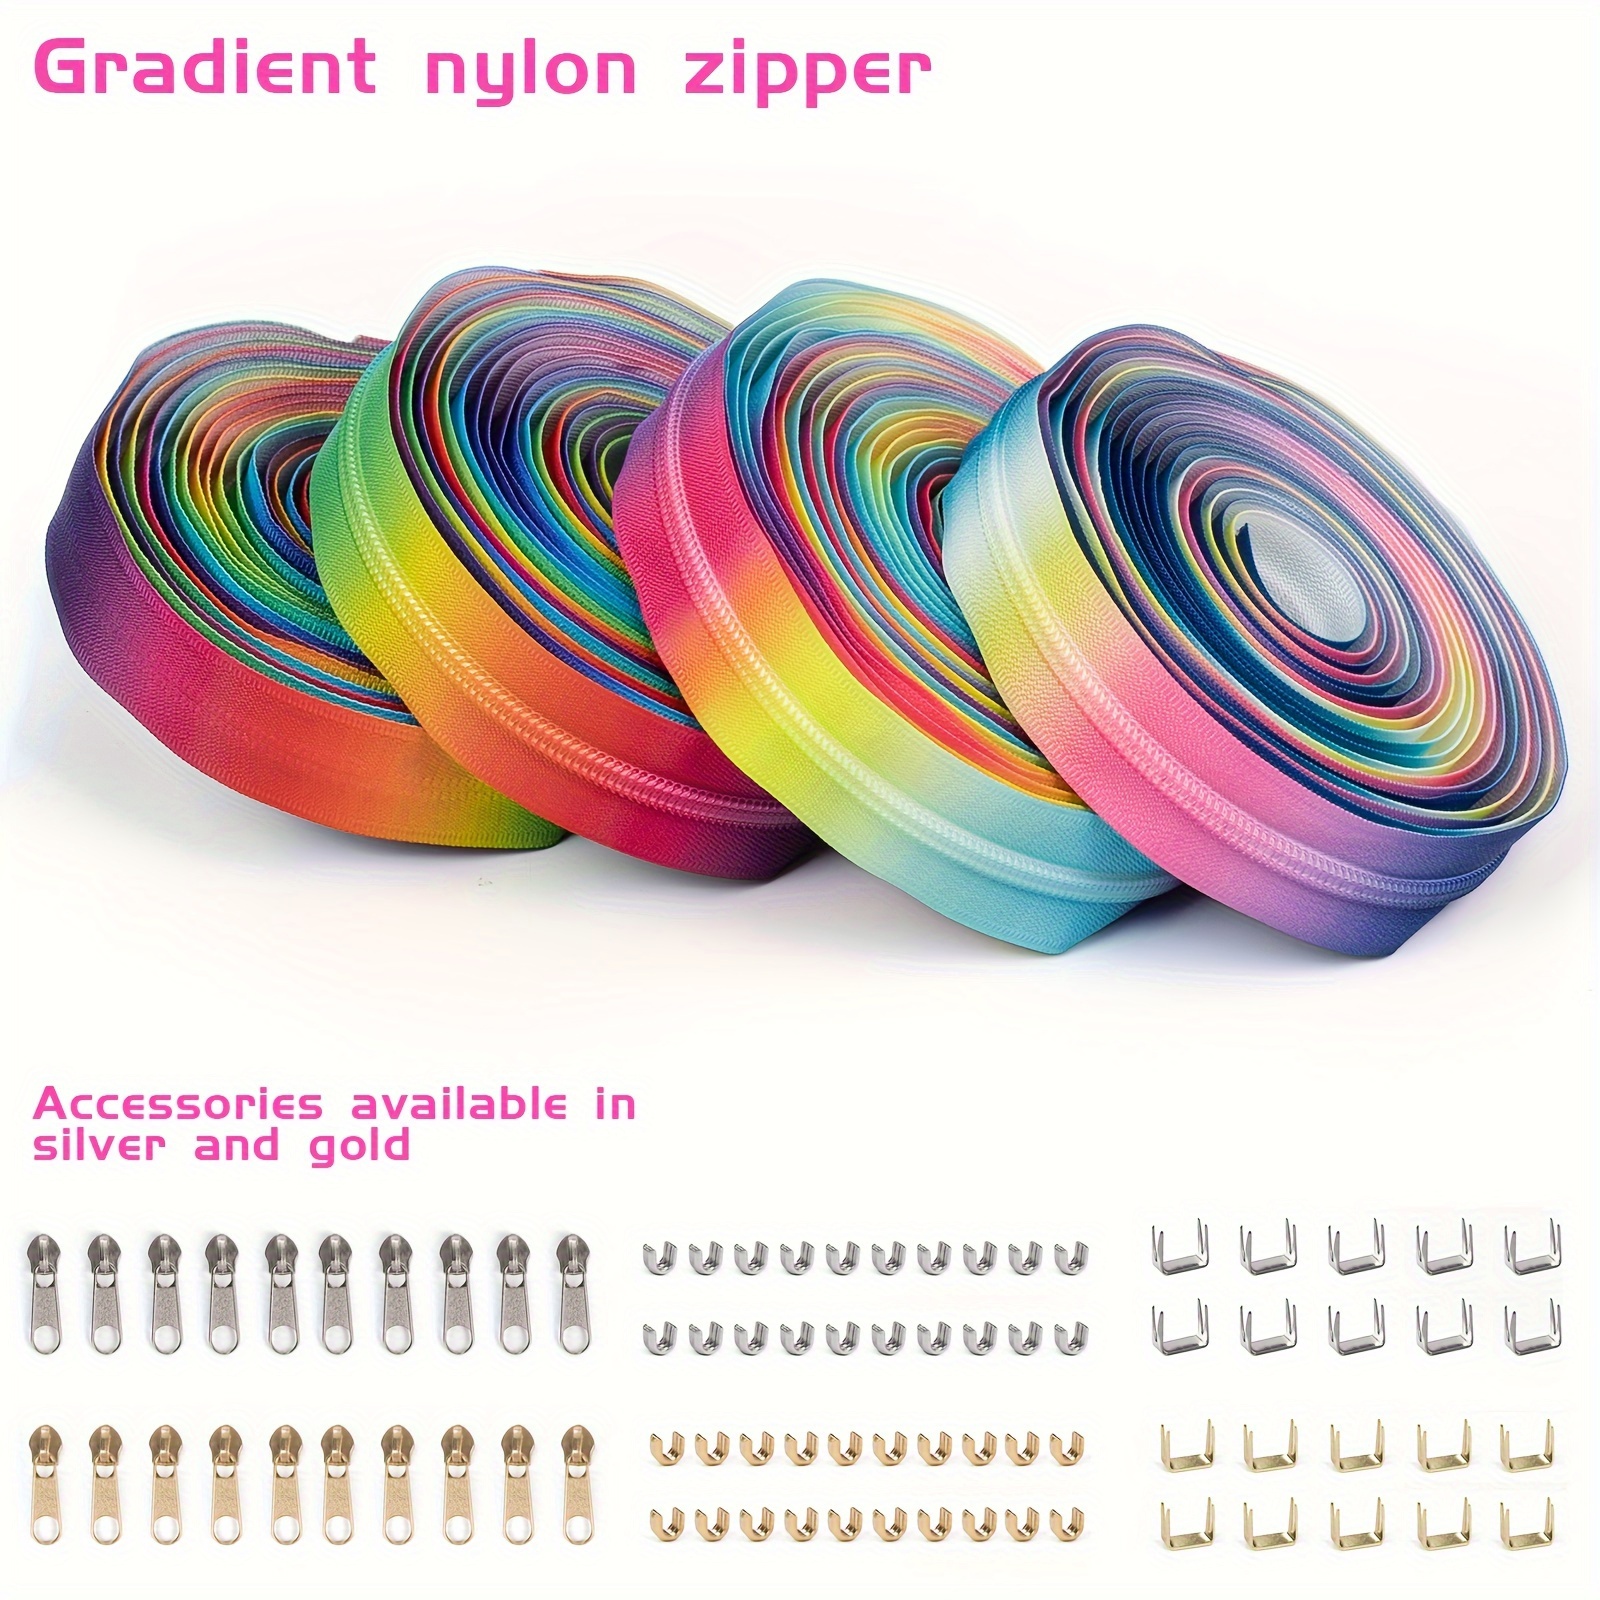 

1set 4 Styles Of Colorful Gradient Nylon Zipper Suitable For Coat Plackets, Pockets, Bags And Backpacks